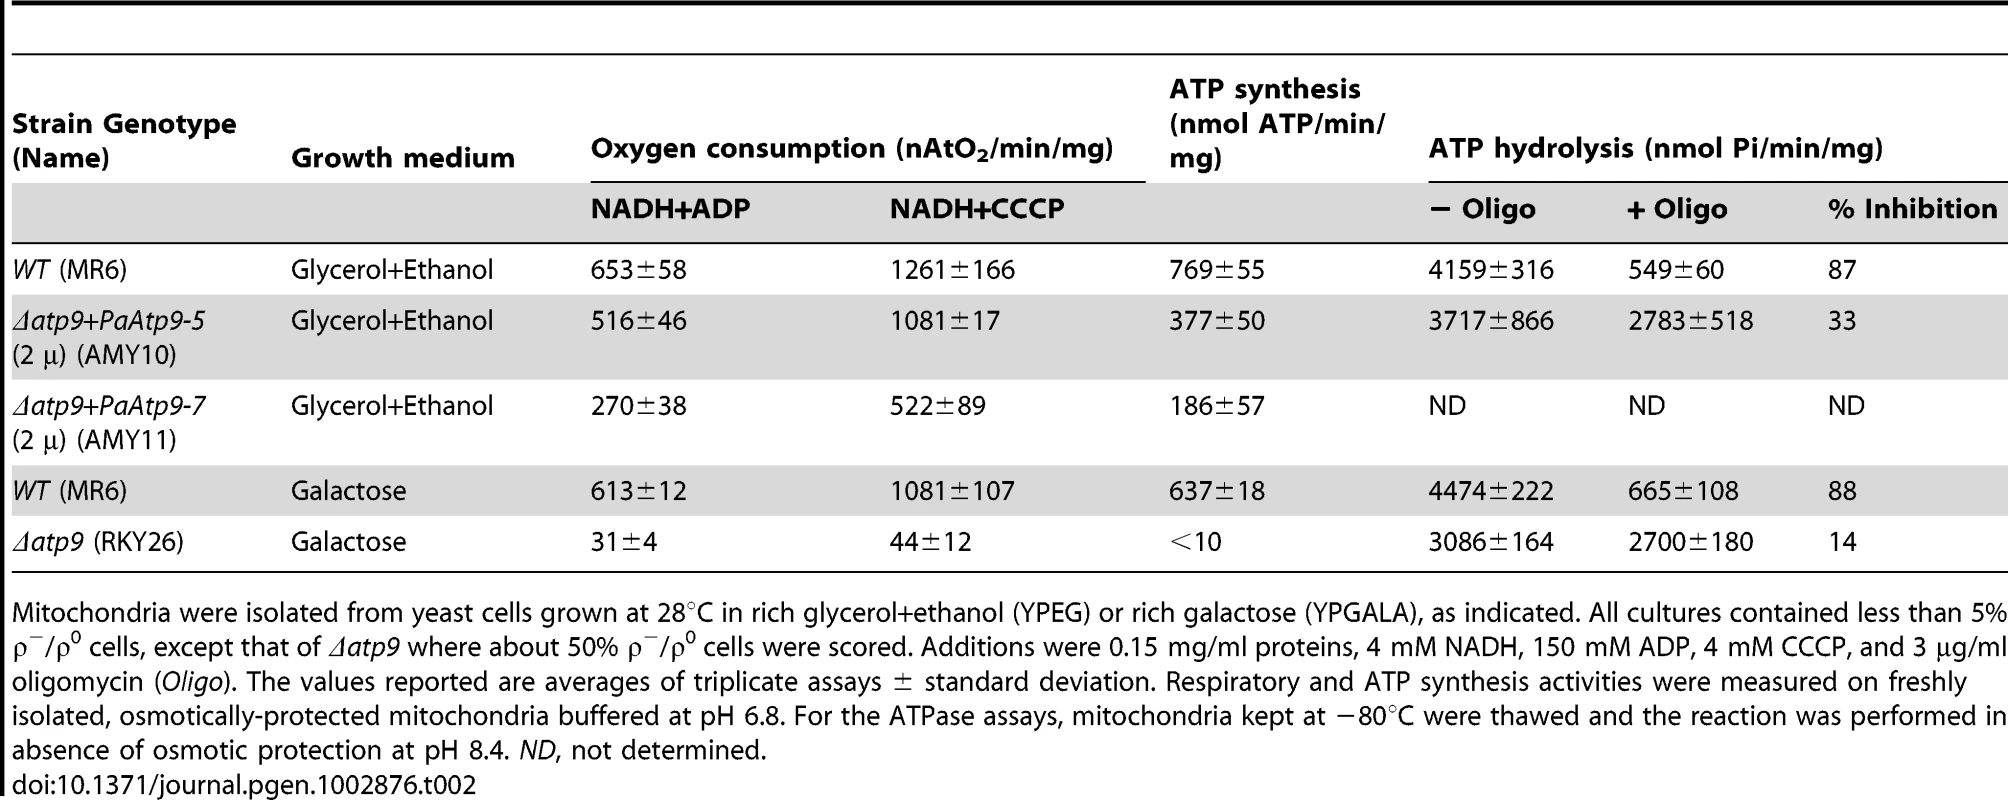 Respiratory and ATP hydrolysis/synthesis activities of mitochondria.